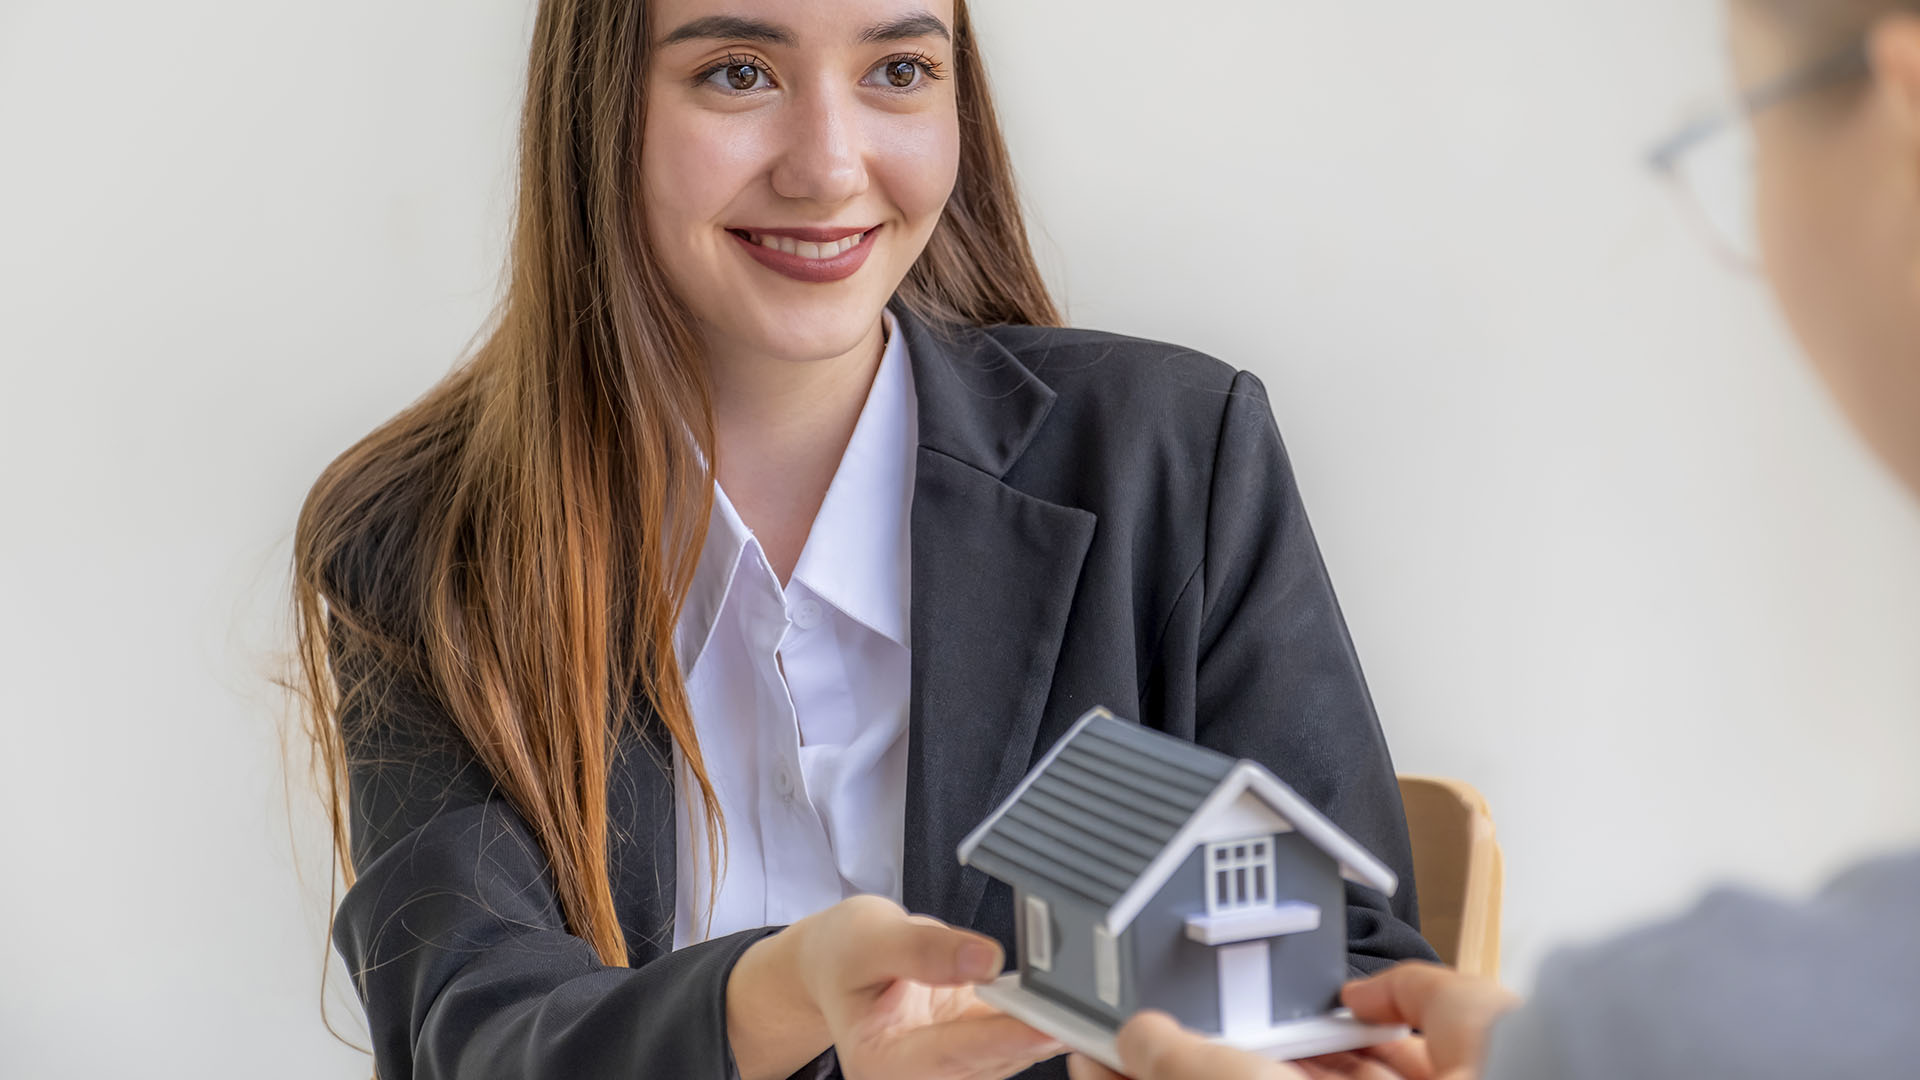 A woman in a blazer hands over a small model house to another person in front of a plain background, posing the question: Is renting ruining your future?